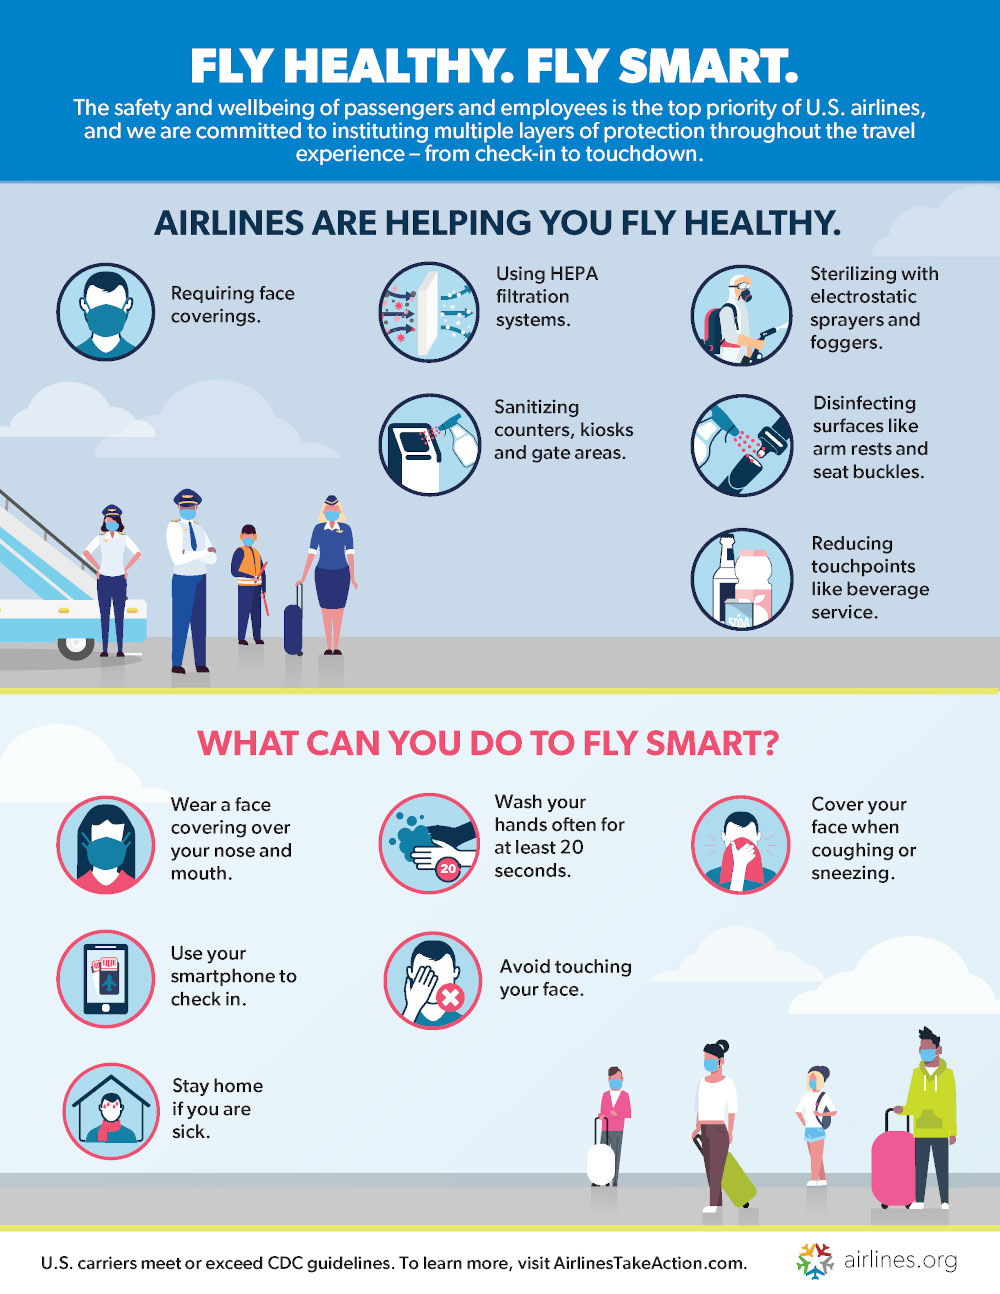 Fly-Healthy-Fly-Smart-Infographic-5-2020